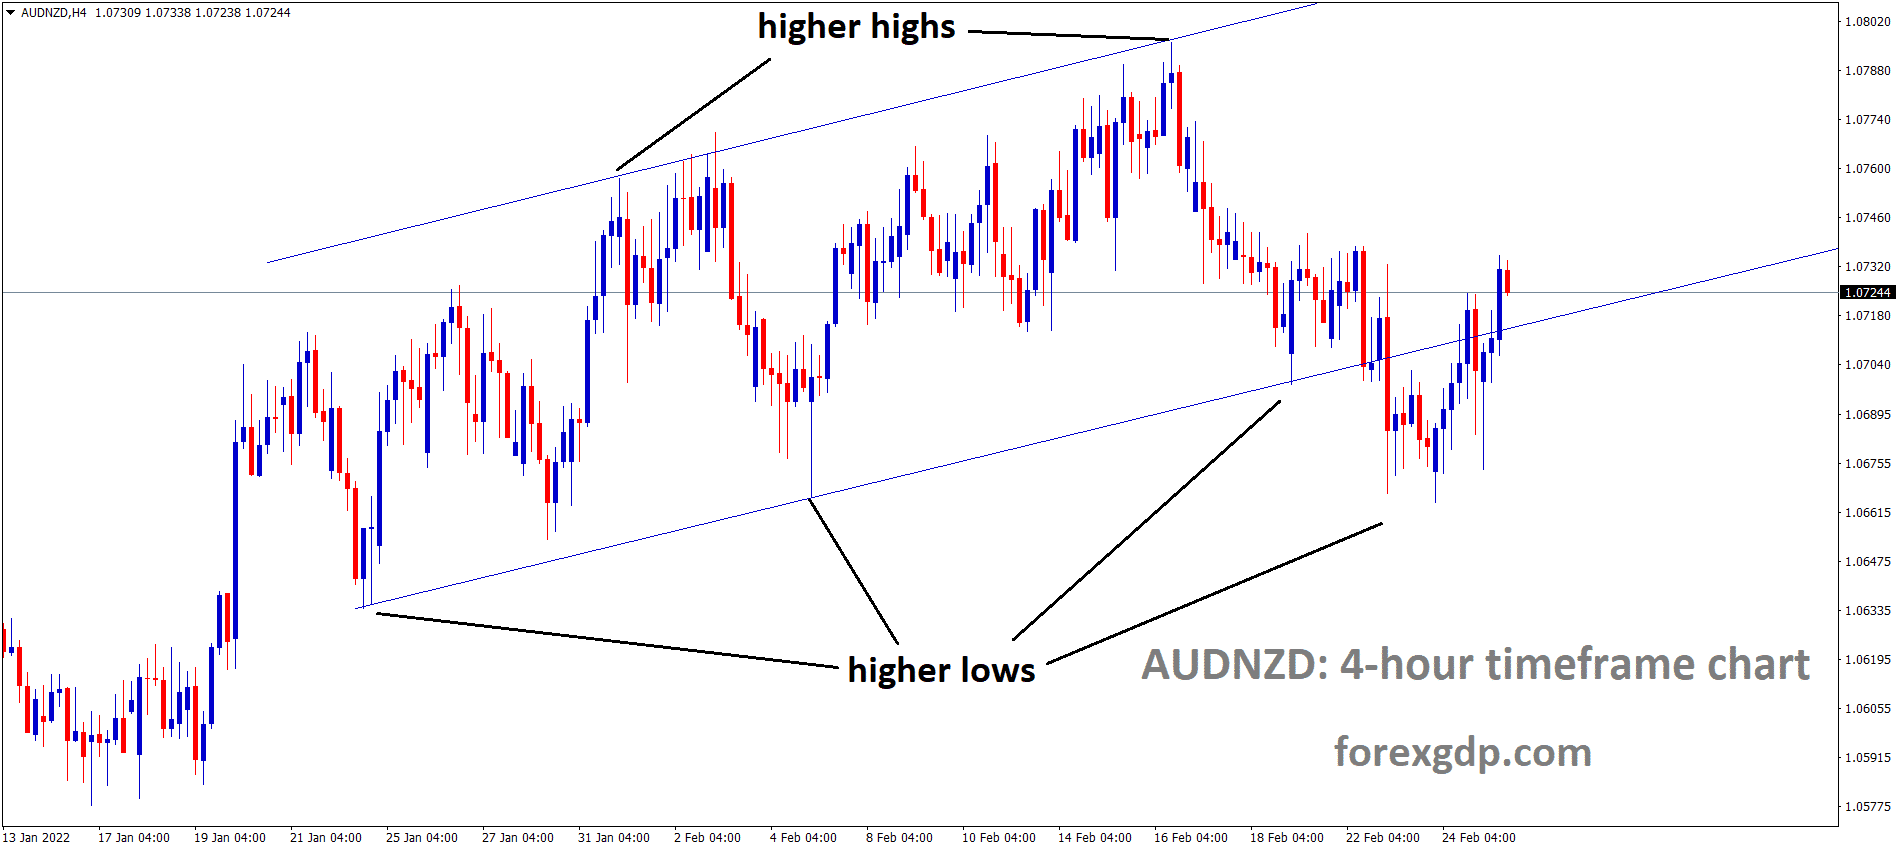 AUDNZD is moving in an Ascending channel and the market has rebounded from the higher low area of the channel. 1